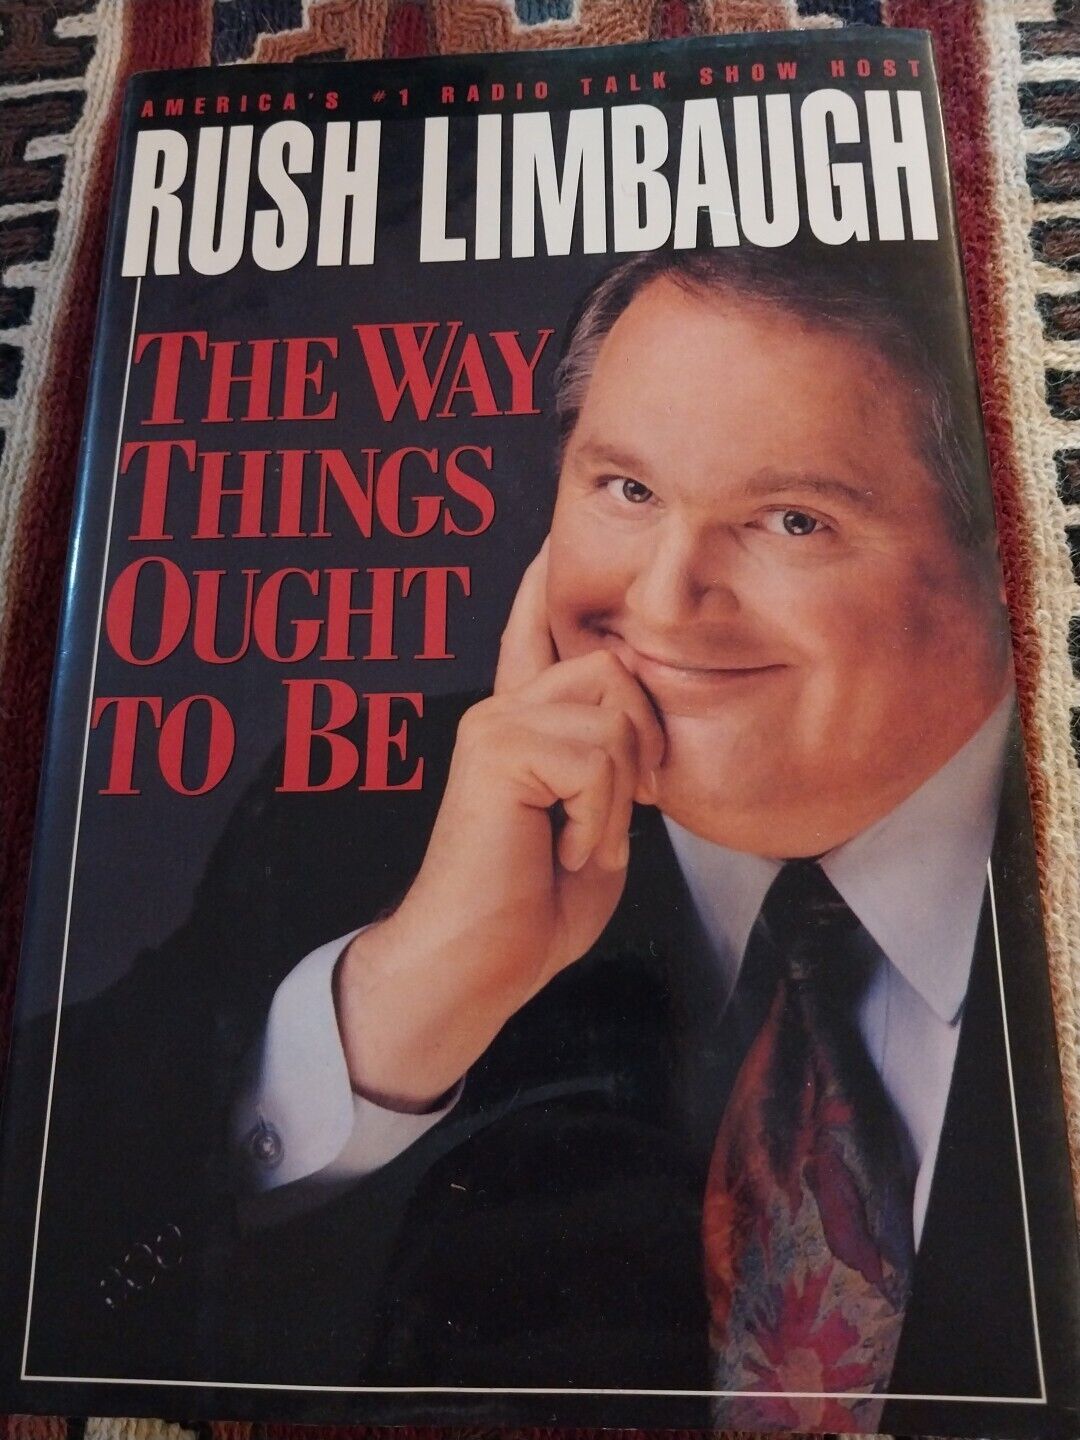 The Way Things Ought to Be - Inscribed by Rush Limbaugh/Clipped Jacket/Very Good